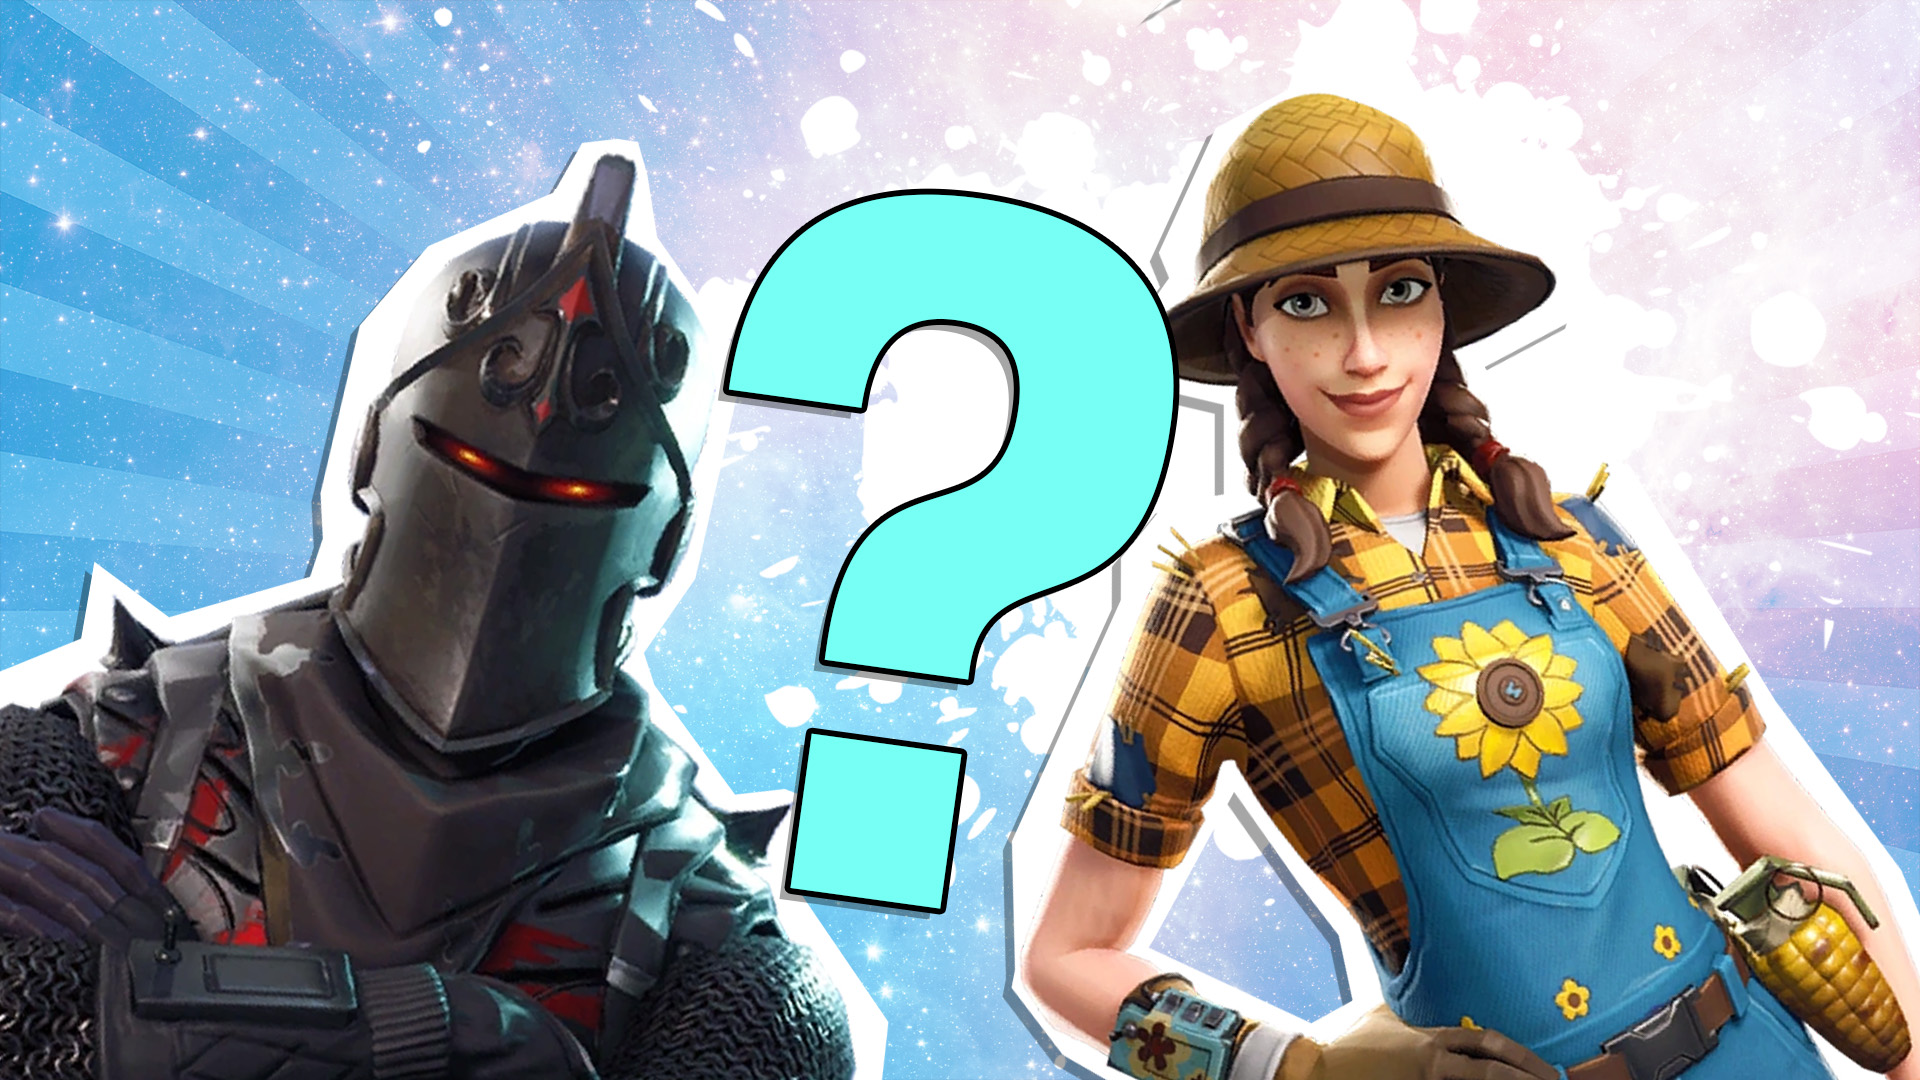 Quiz: Test Your Knowledge of the Fortnite VBuck System! - Trivia & Questions